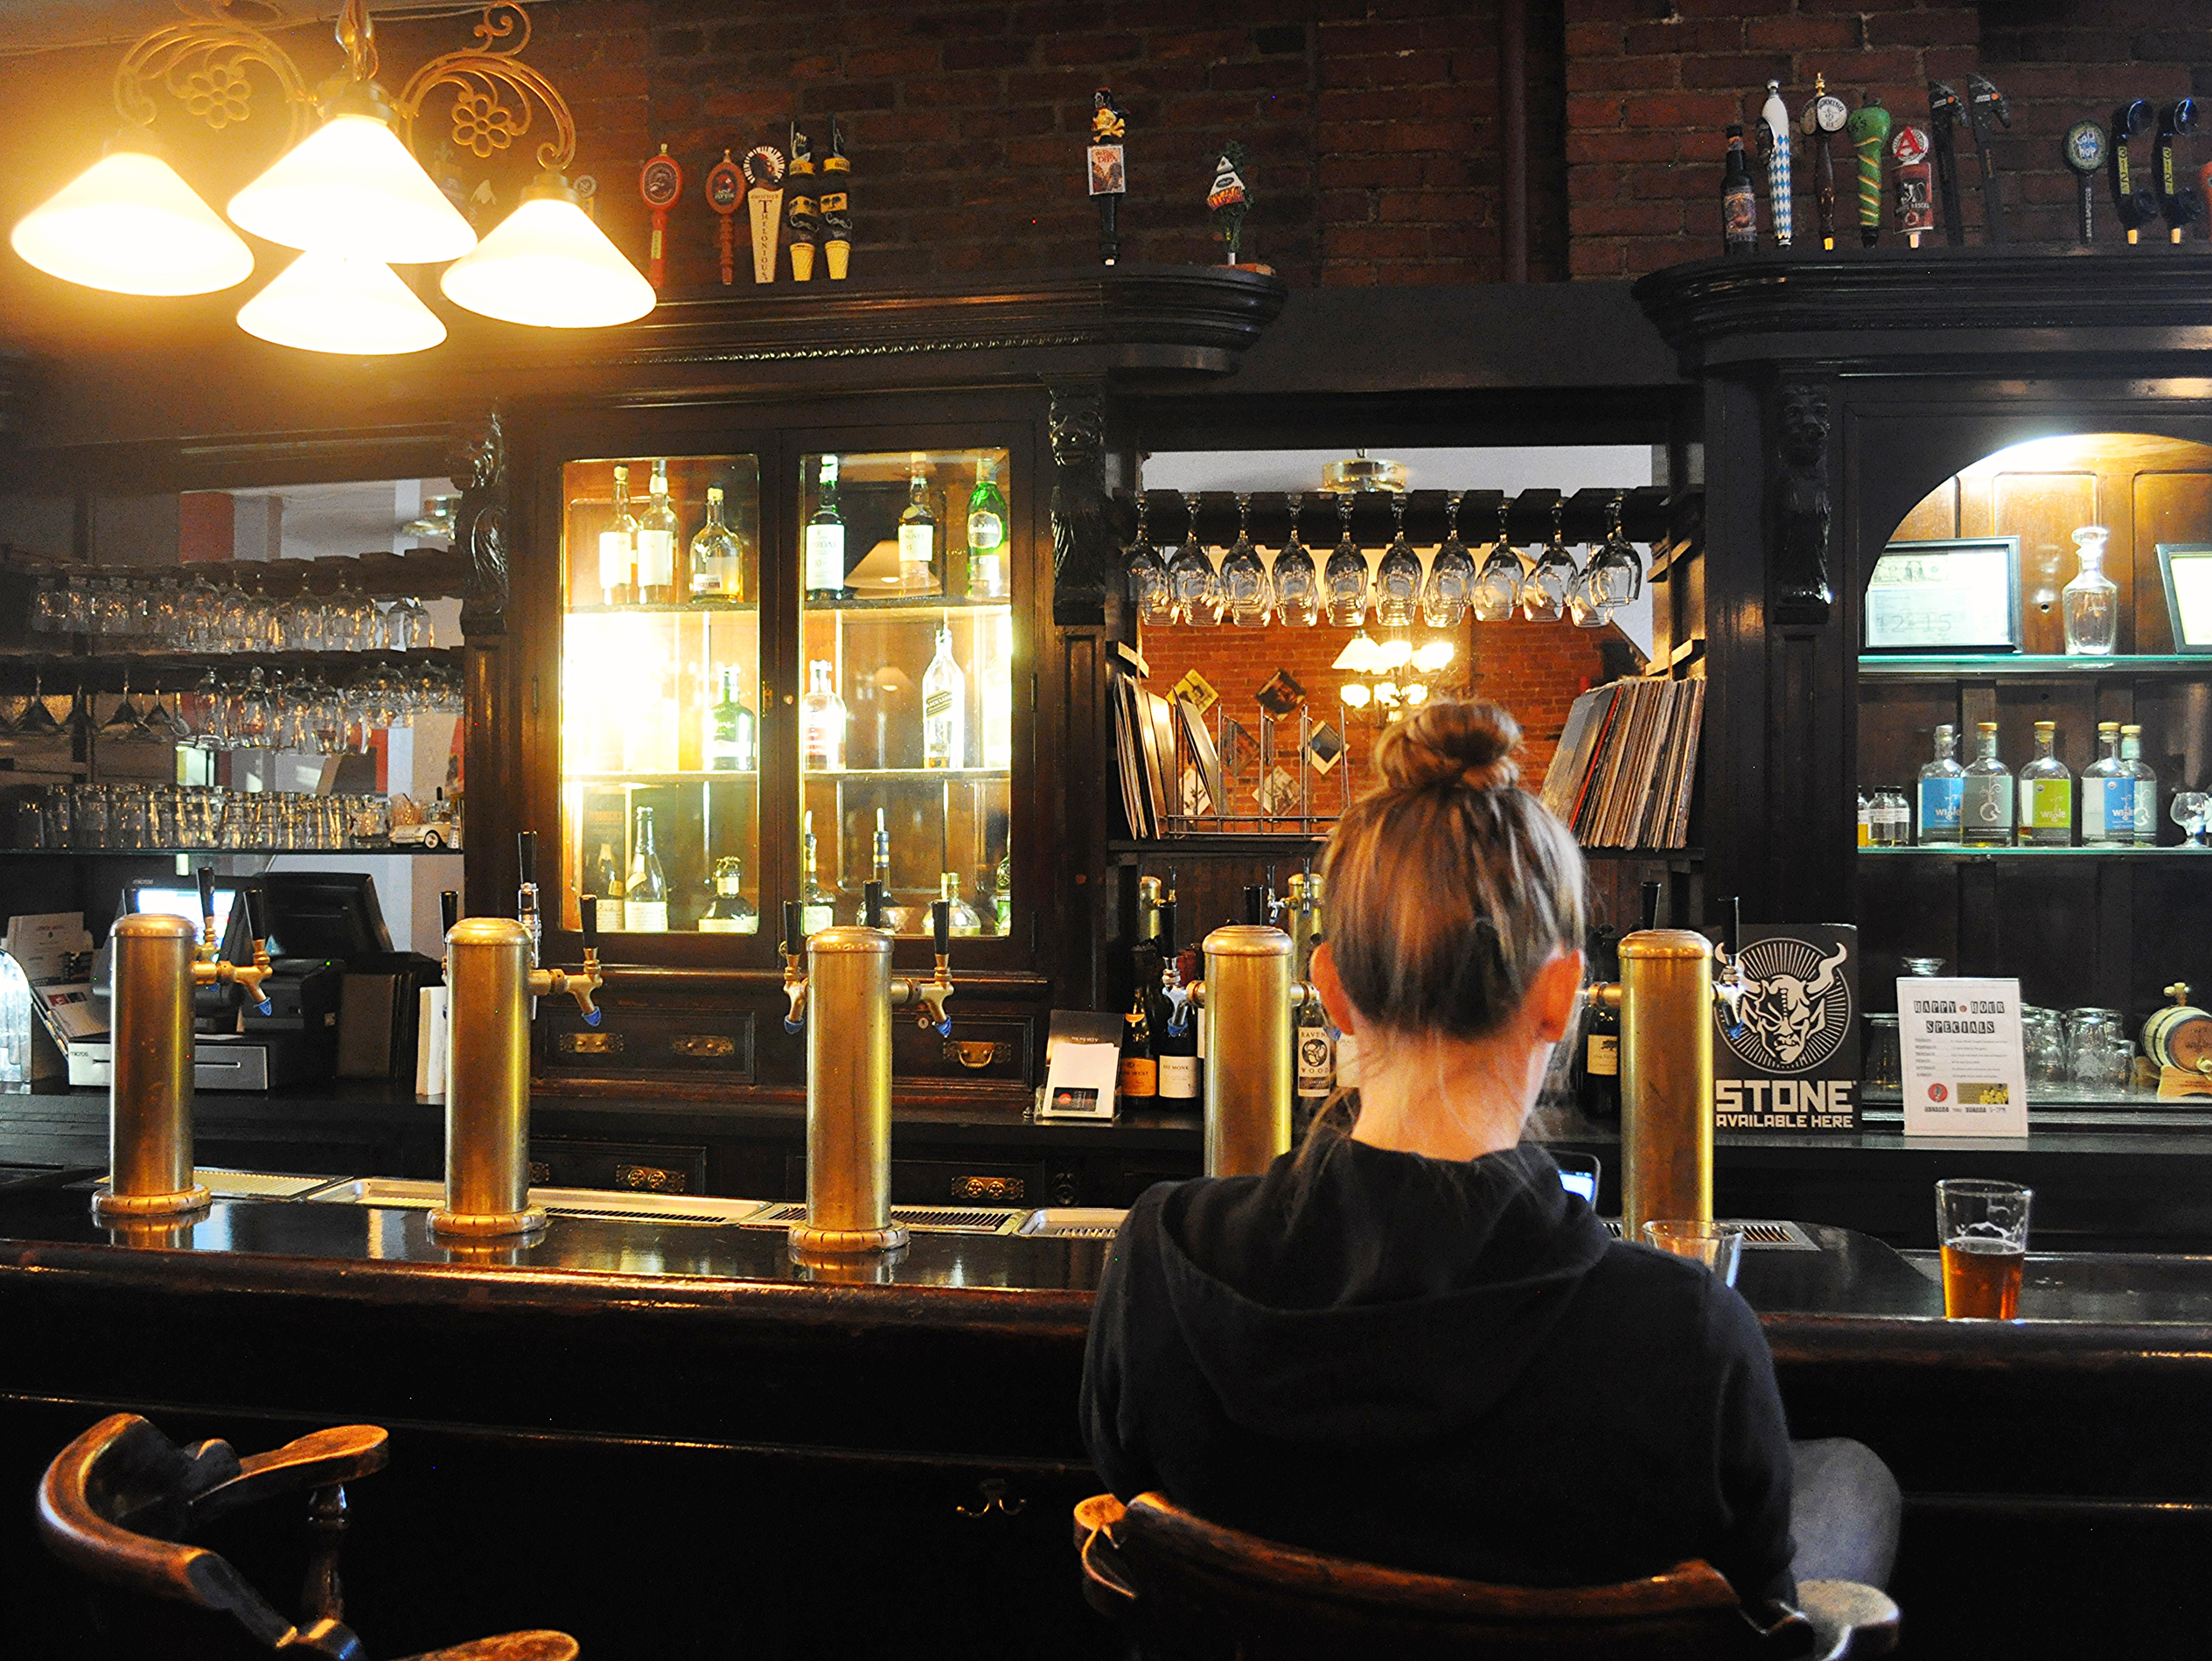 Have a drink on me: Pittsburgh's 15 best looking bars | Pittsburgh ...